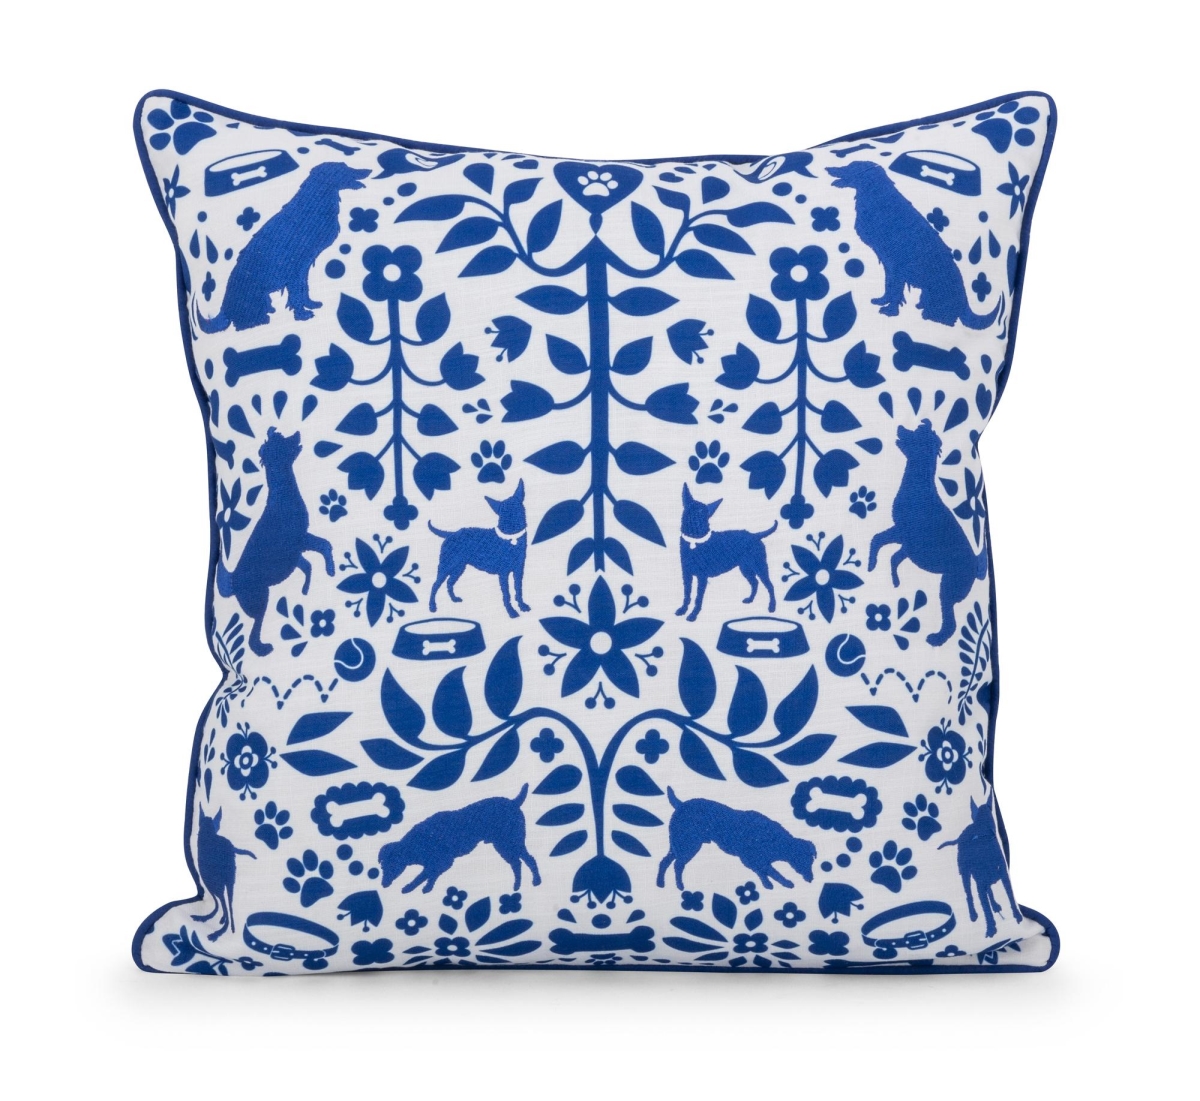 Imax 90587 18 X 18 In. Otomi Dog Pillow